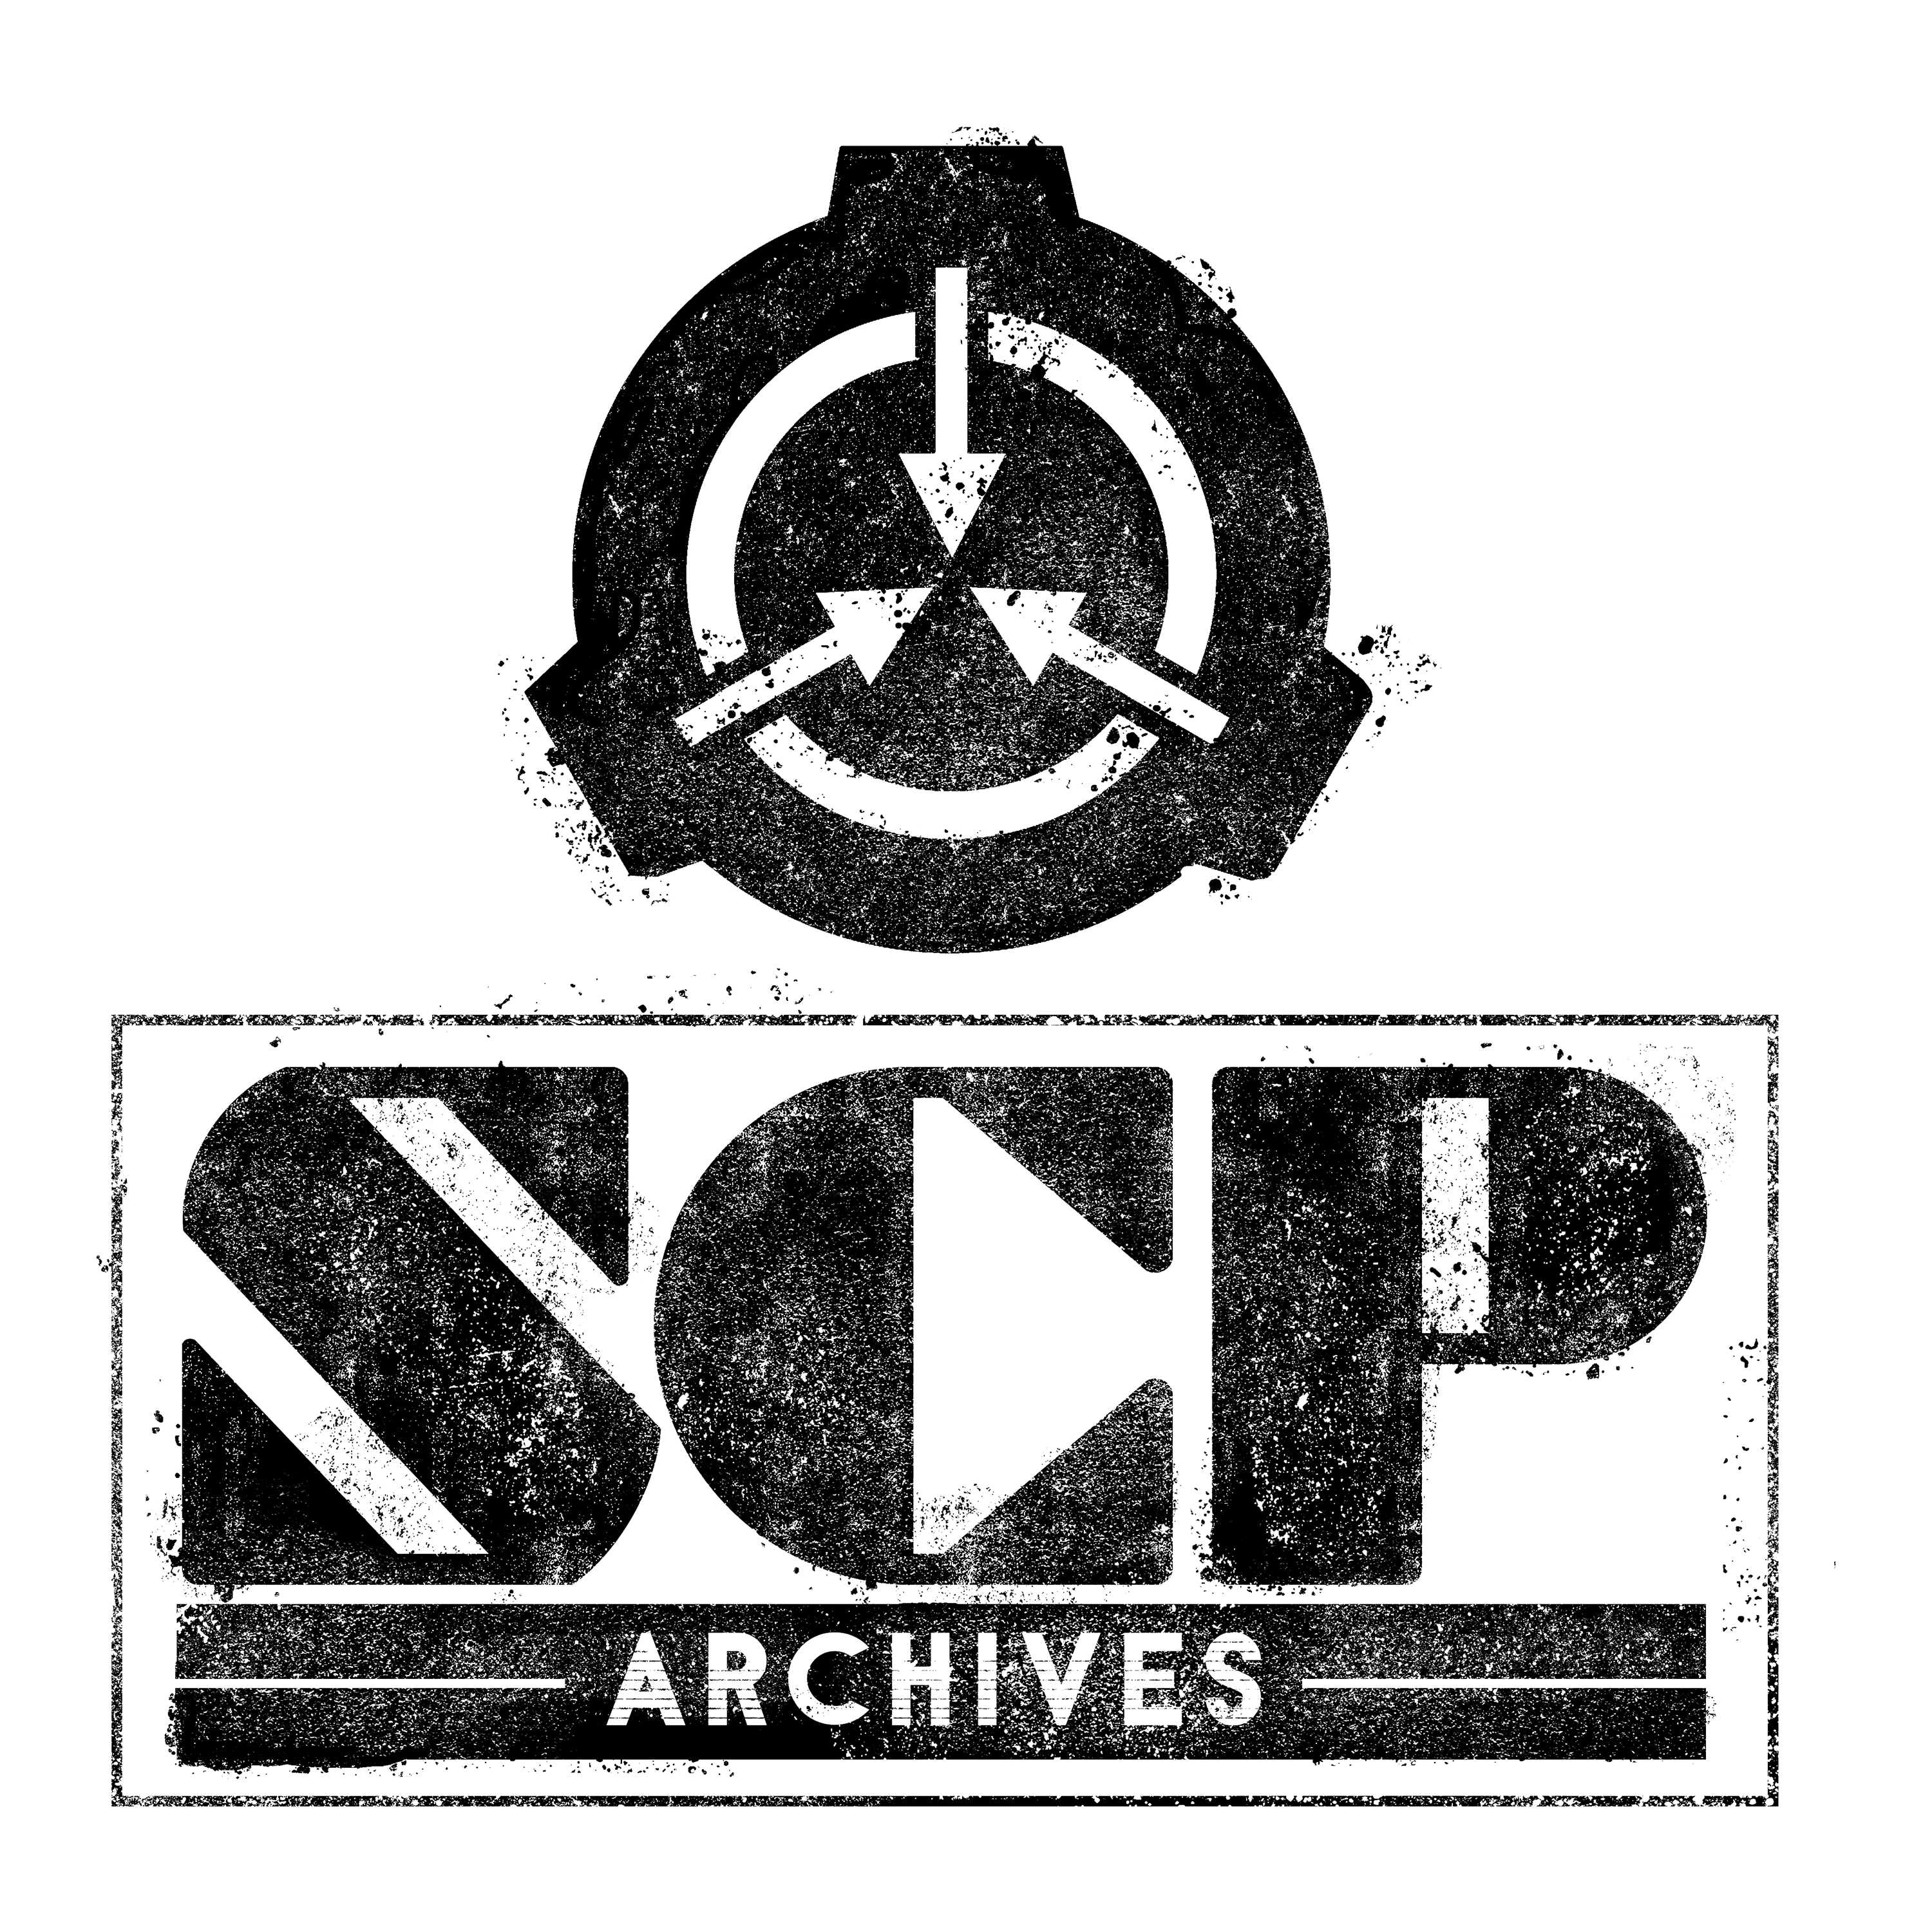 SCP-7999 - SCP Foundation